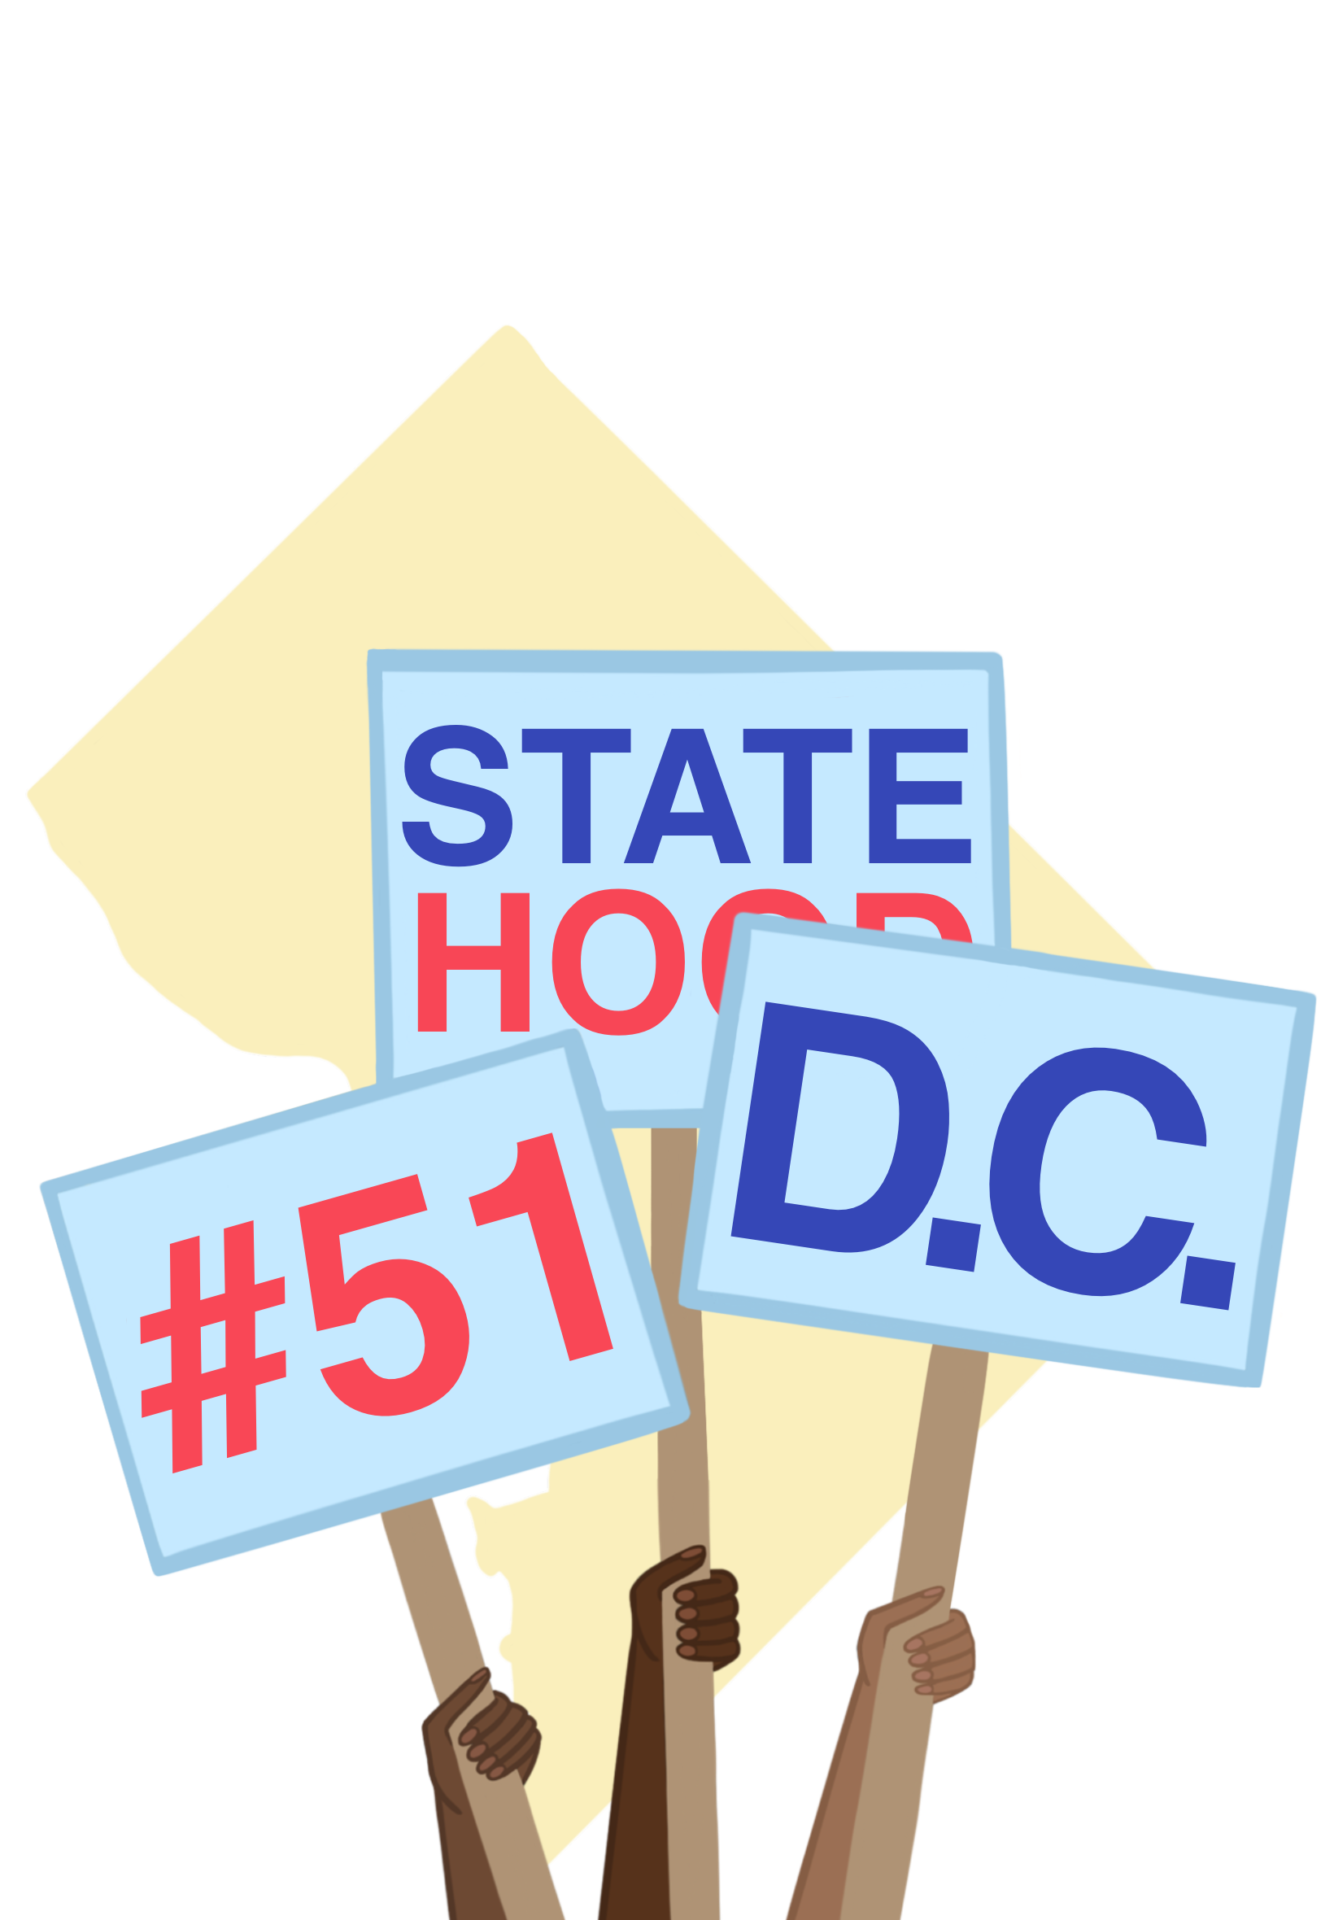 Arms hold up picket signs advocating for Washington D.C. to become the 51st state of the United States